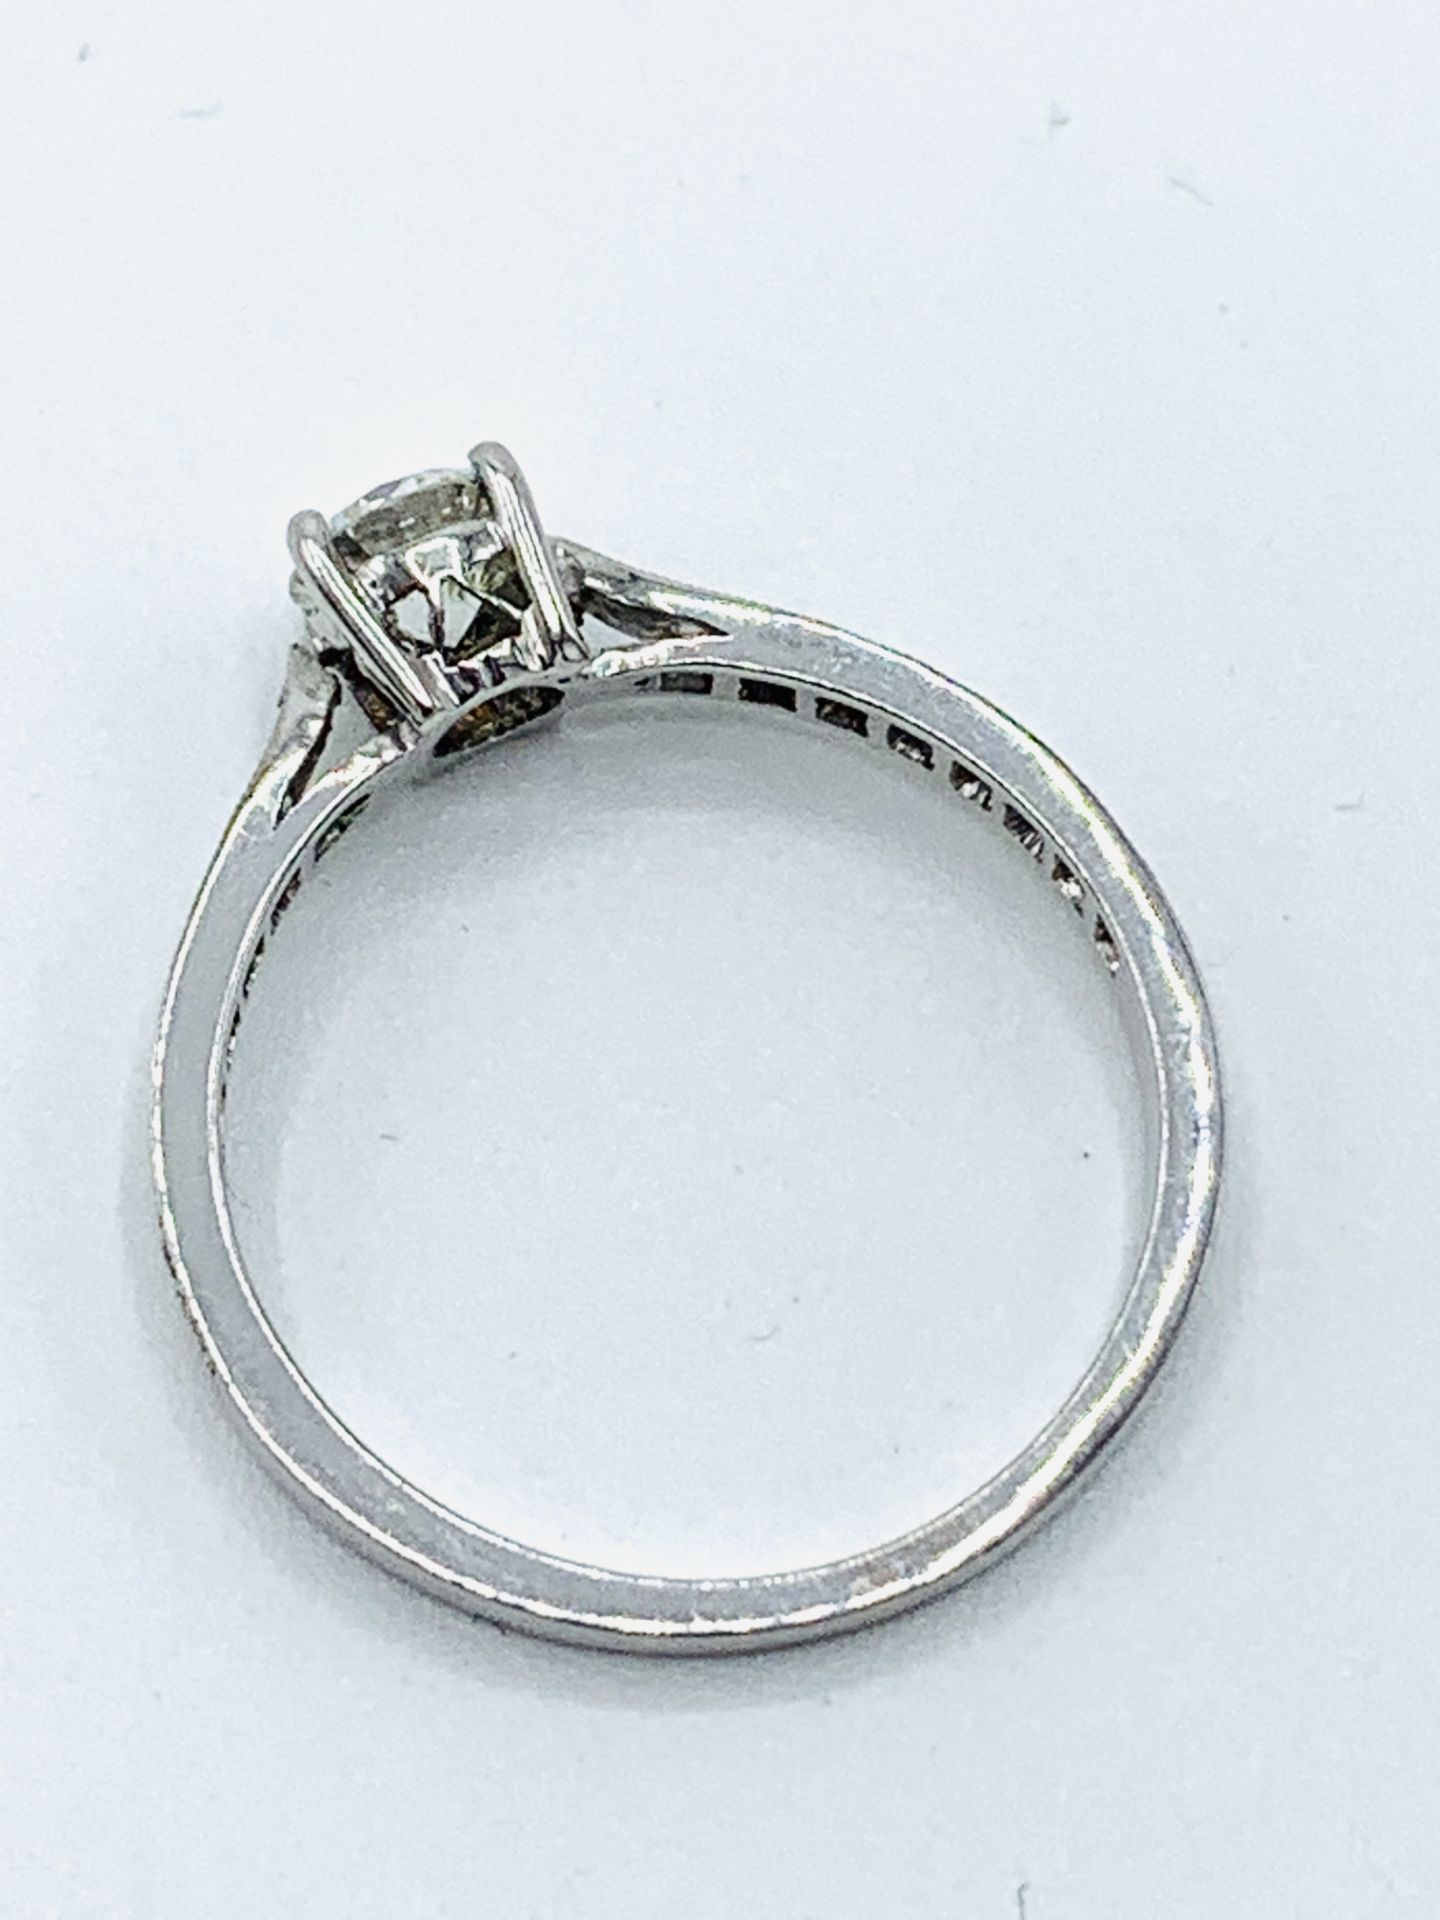 White gold solitaire ring with diamond shoulders - Image 3 of 4